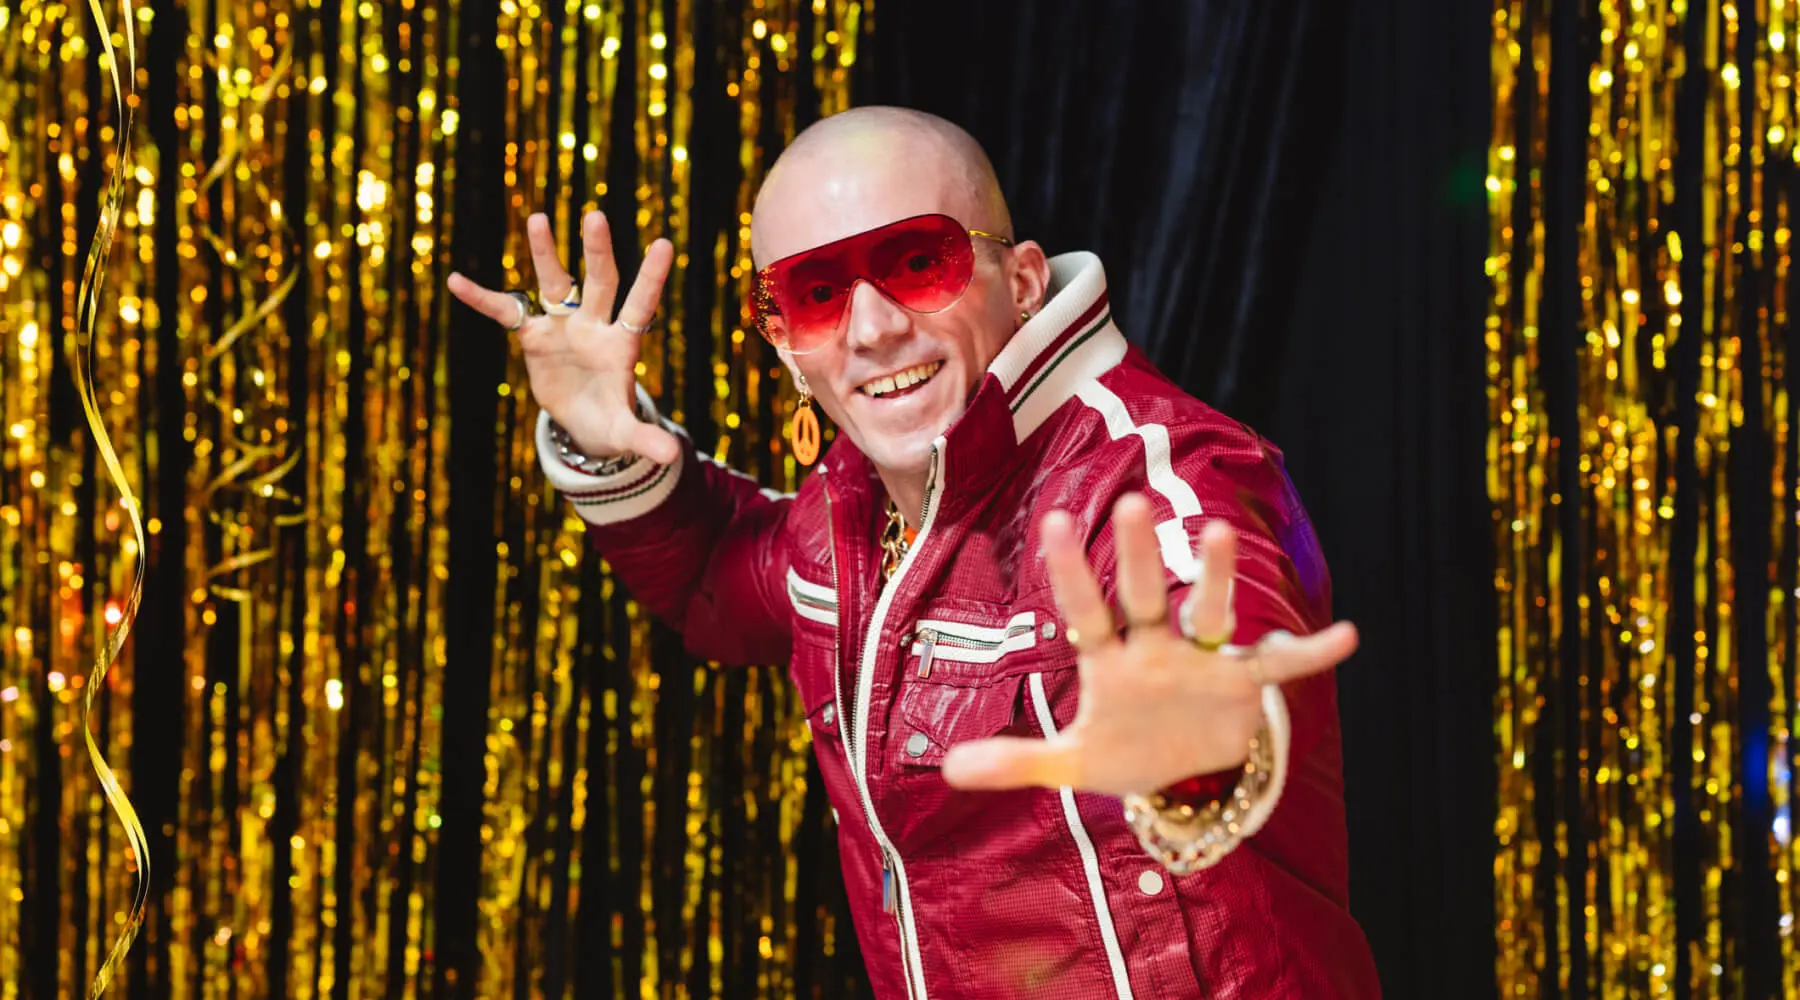 Bald man wearing red jacket and sunglasses